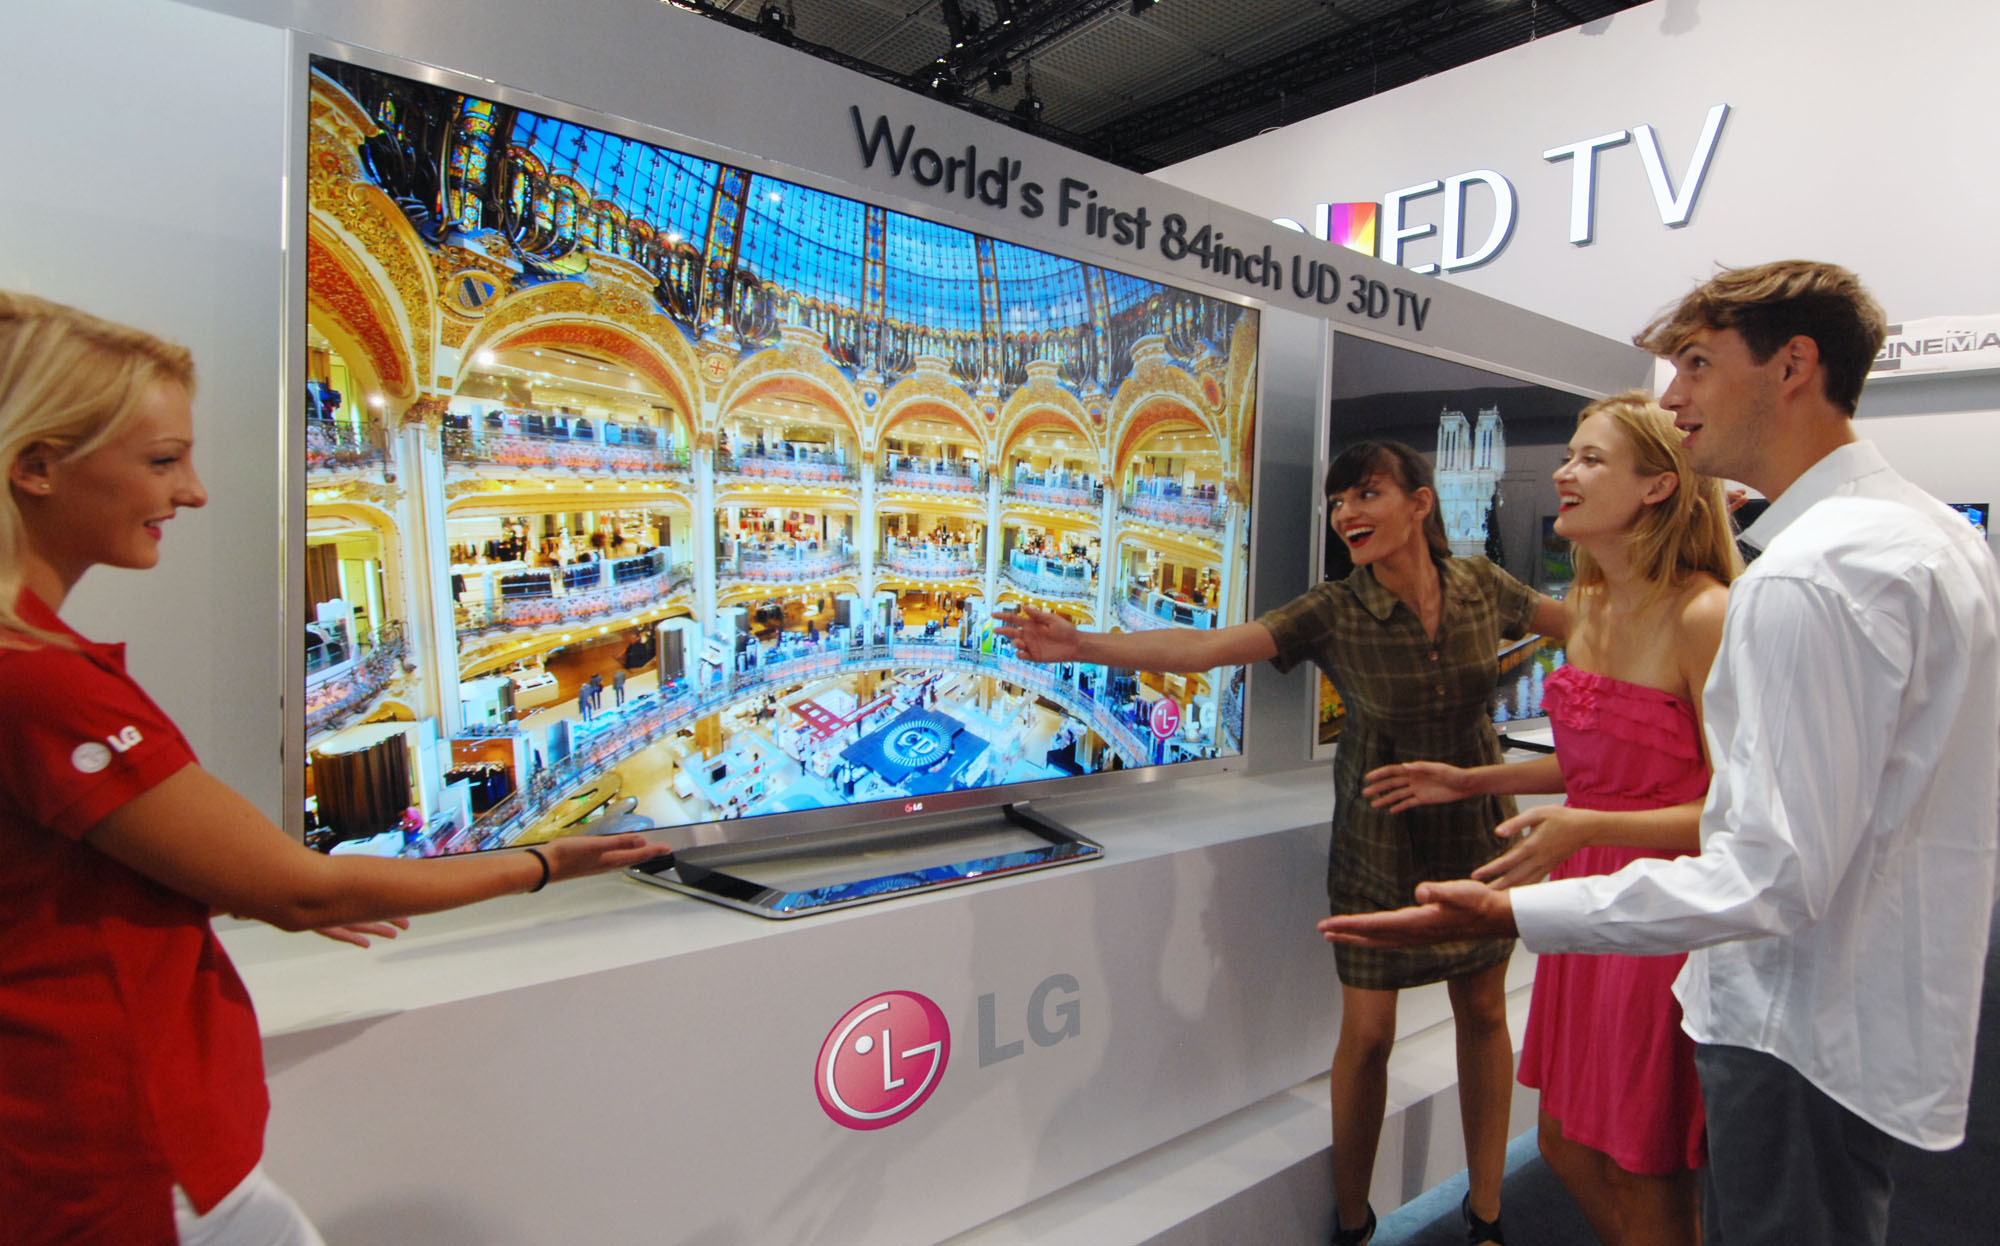 An LG booth staff member introducing the world’s first 84-inch UD 3D TV to visitors at IFA 2012